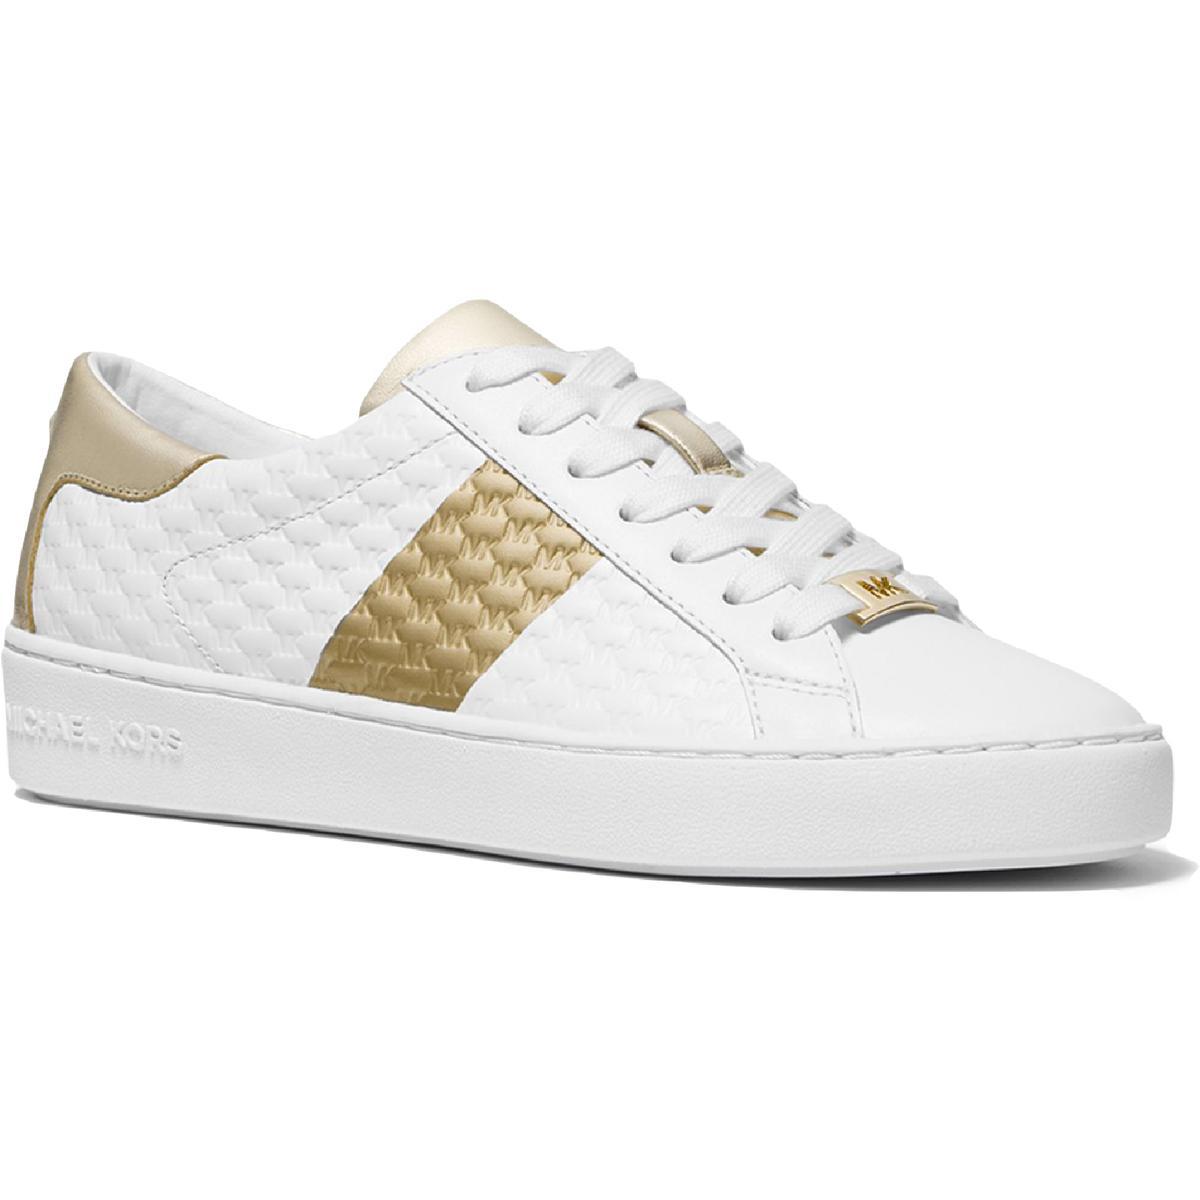 Michael Kors Colby Womens Leather Logo Casual and Fashion Sneakers